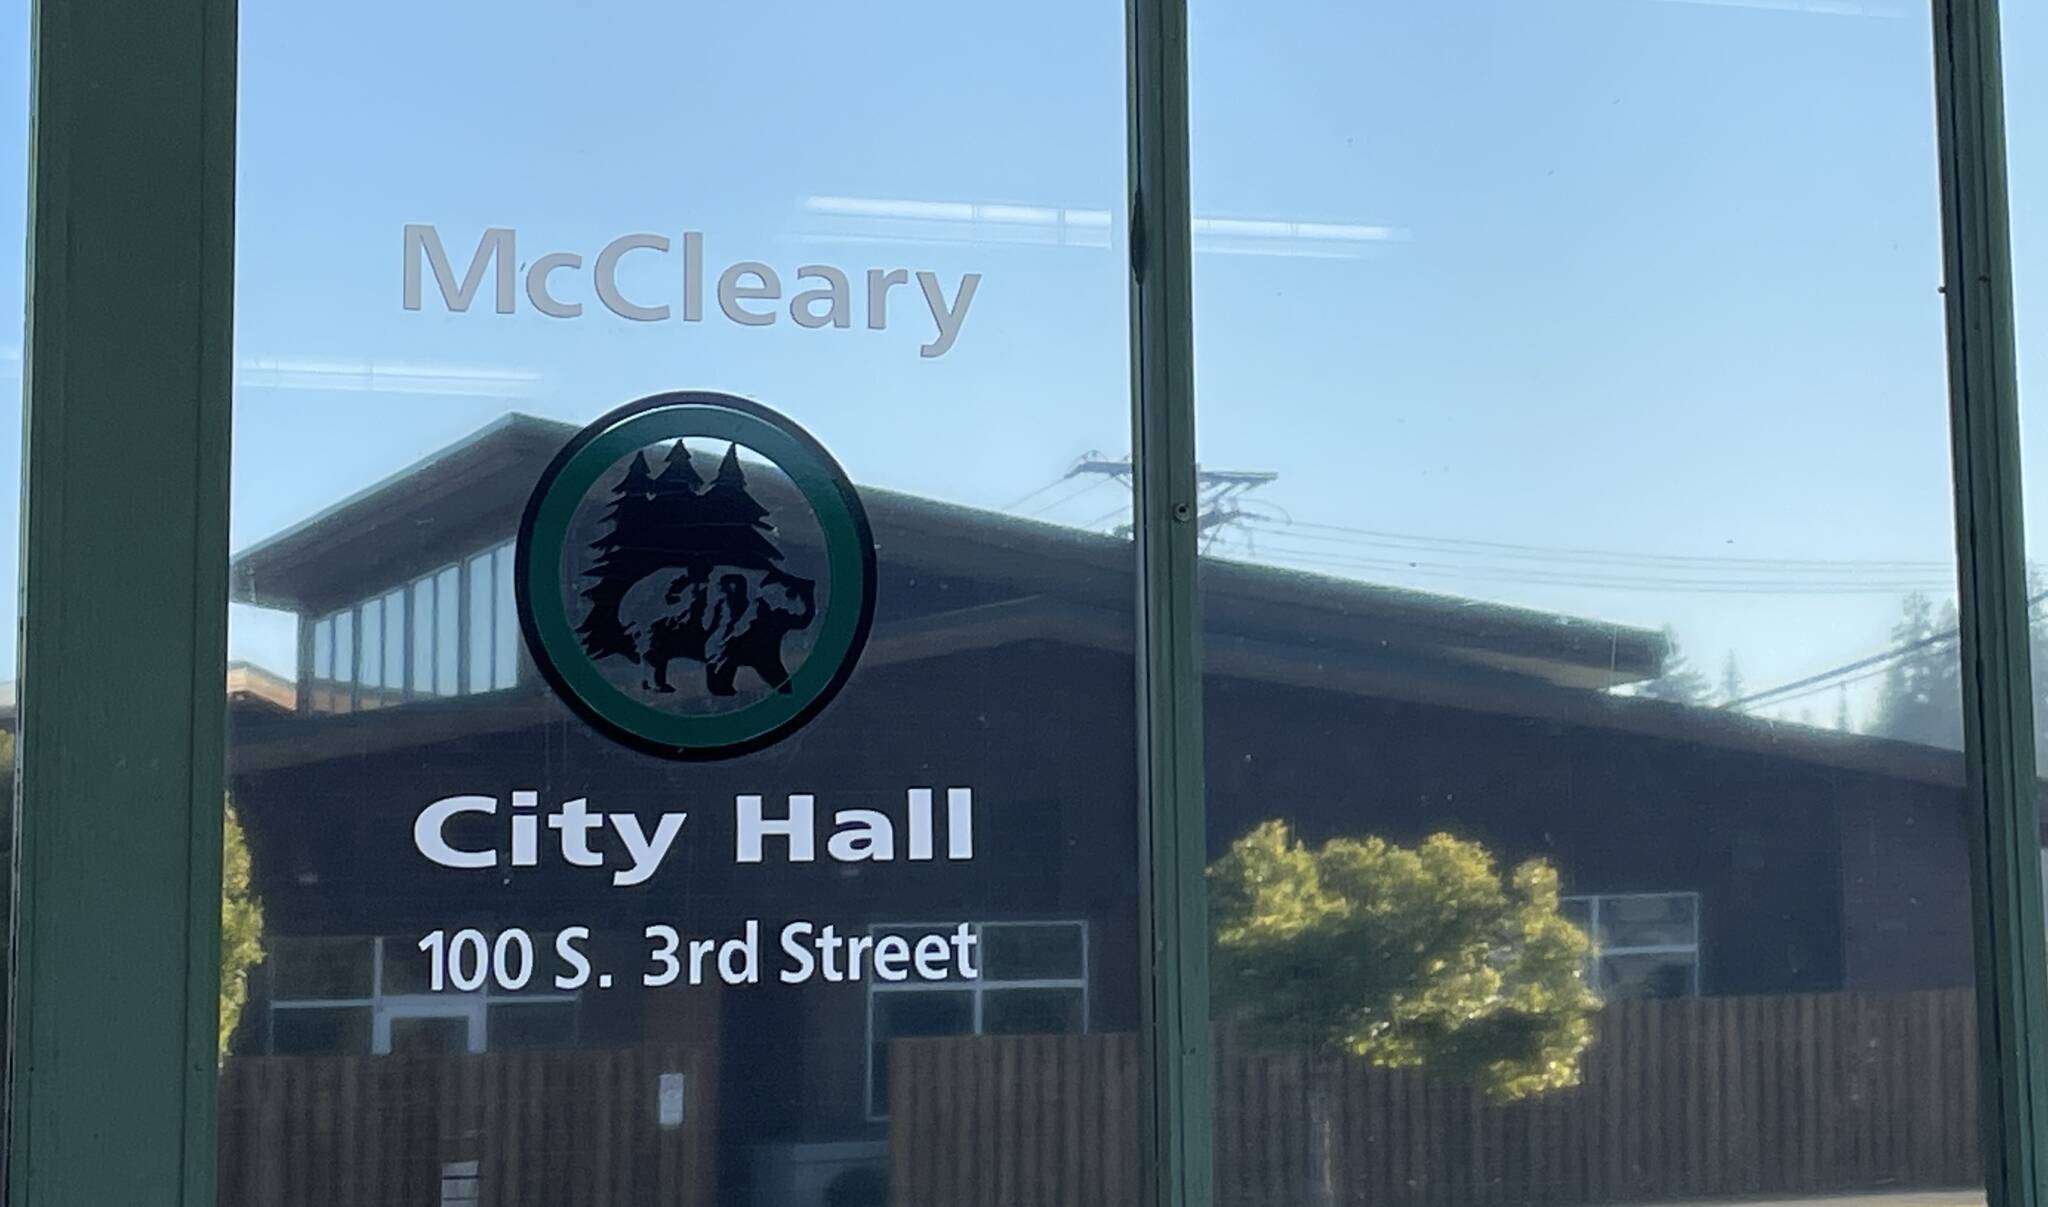 McCleary is seeking to fill a city council seat temporarily until a permanent election in November fills it. (Michael S. Lockett / The Daily World)